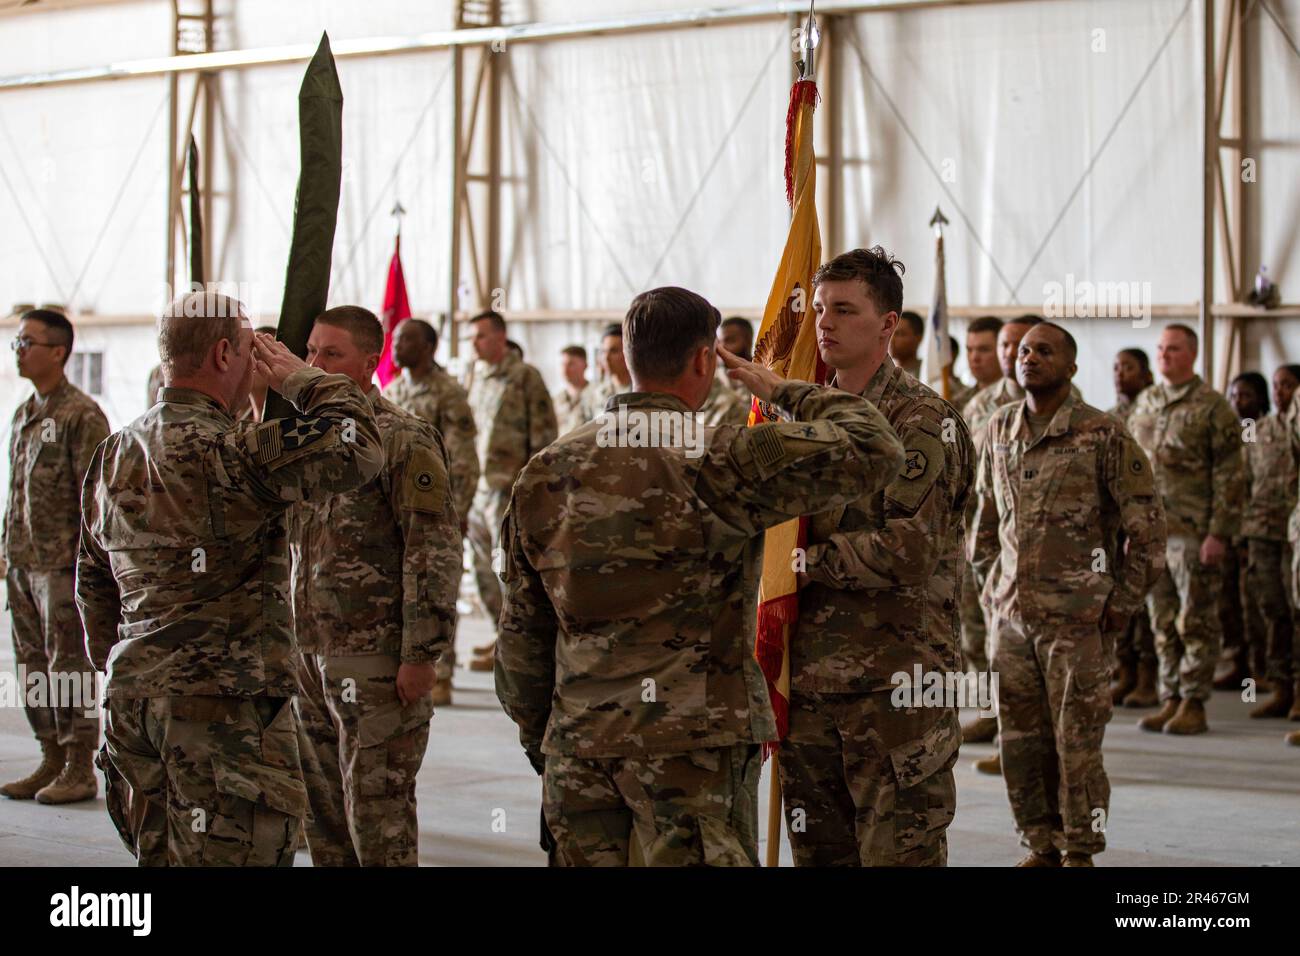 U.S. Army Lt. Col. Scott Eberle and Command Sgt. Maj. Shaun Collins, the command team of the 382nd Combat Sustainment Support Battalion, render a salute at they uncased their battalion colors during a ceremony in which the 336th CSSB transfers authority to the 382nd. These battalions are subordinate to the 369th Sustainment Brigade while forward deployed to the CENTCOM area of operations. Stock Photo